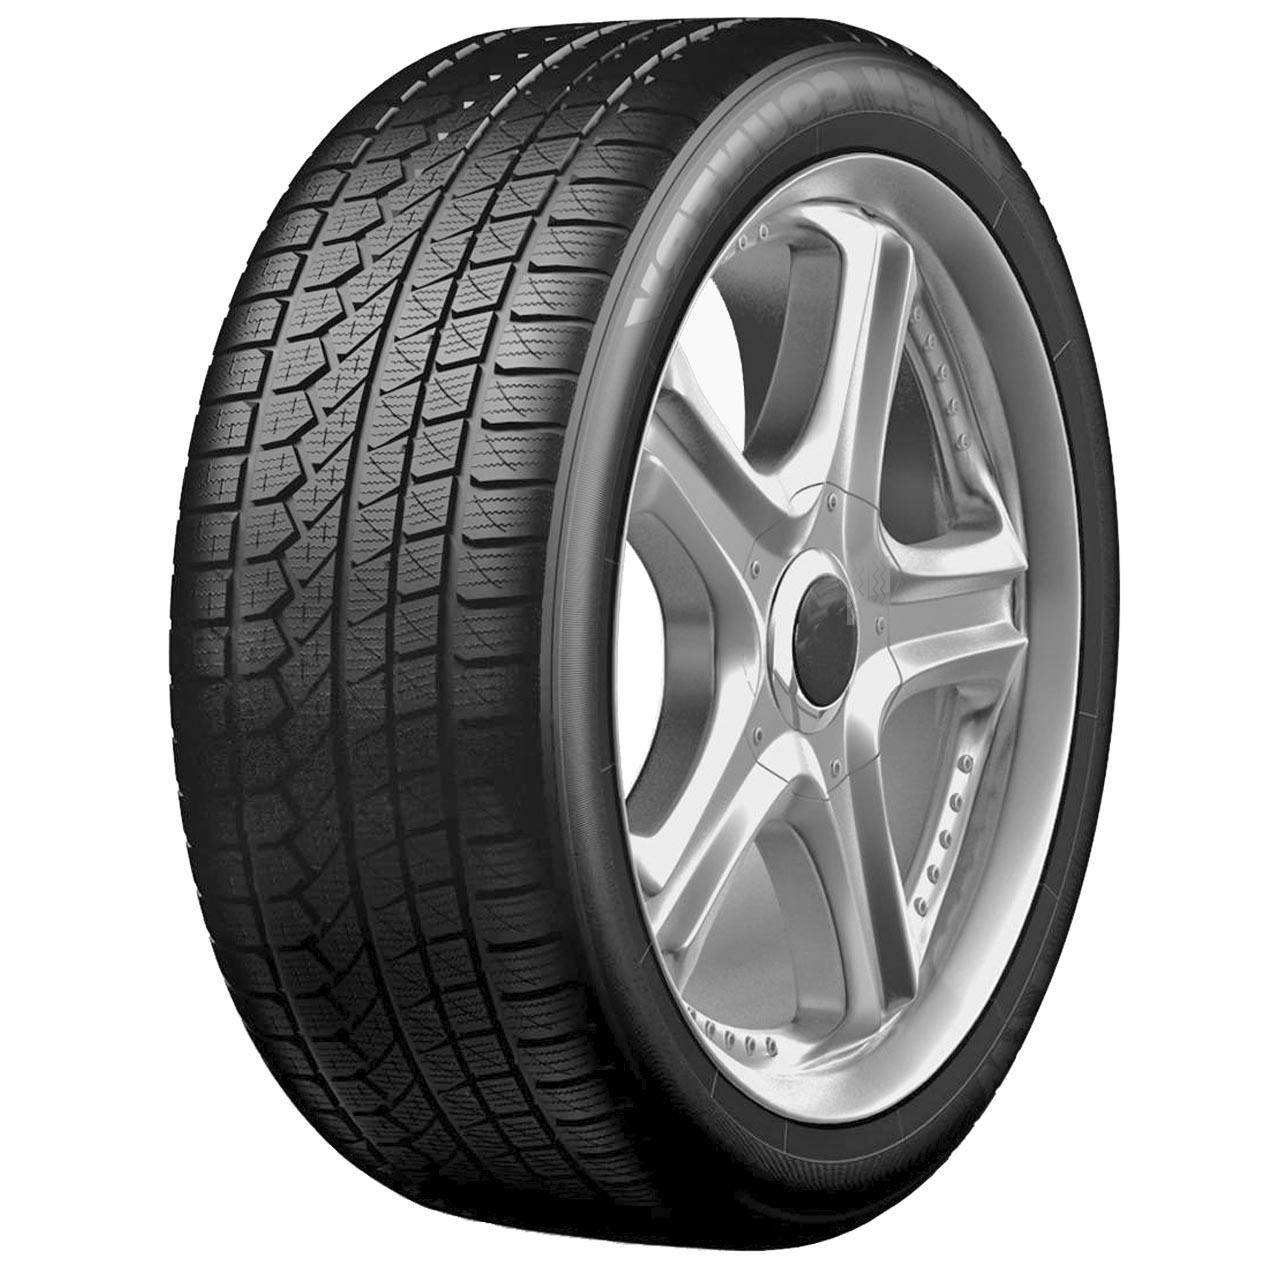 Toyo 275/45R20 110V XL Open Country W/T TL